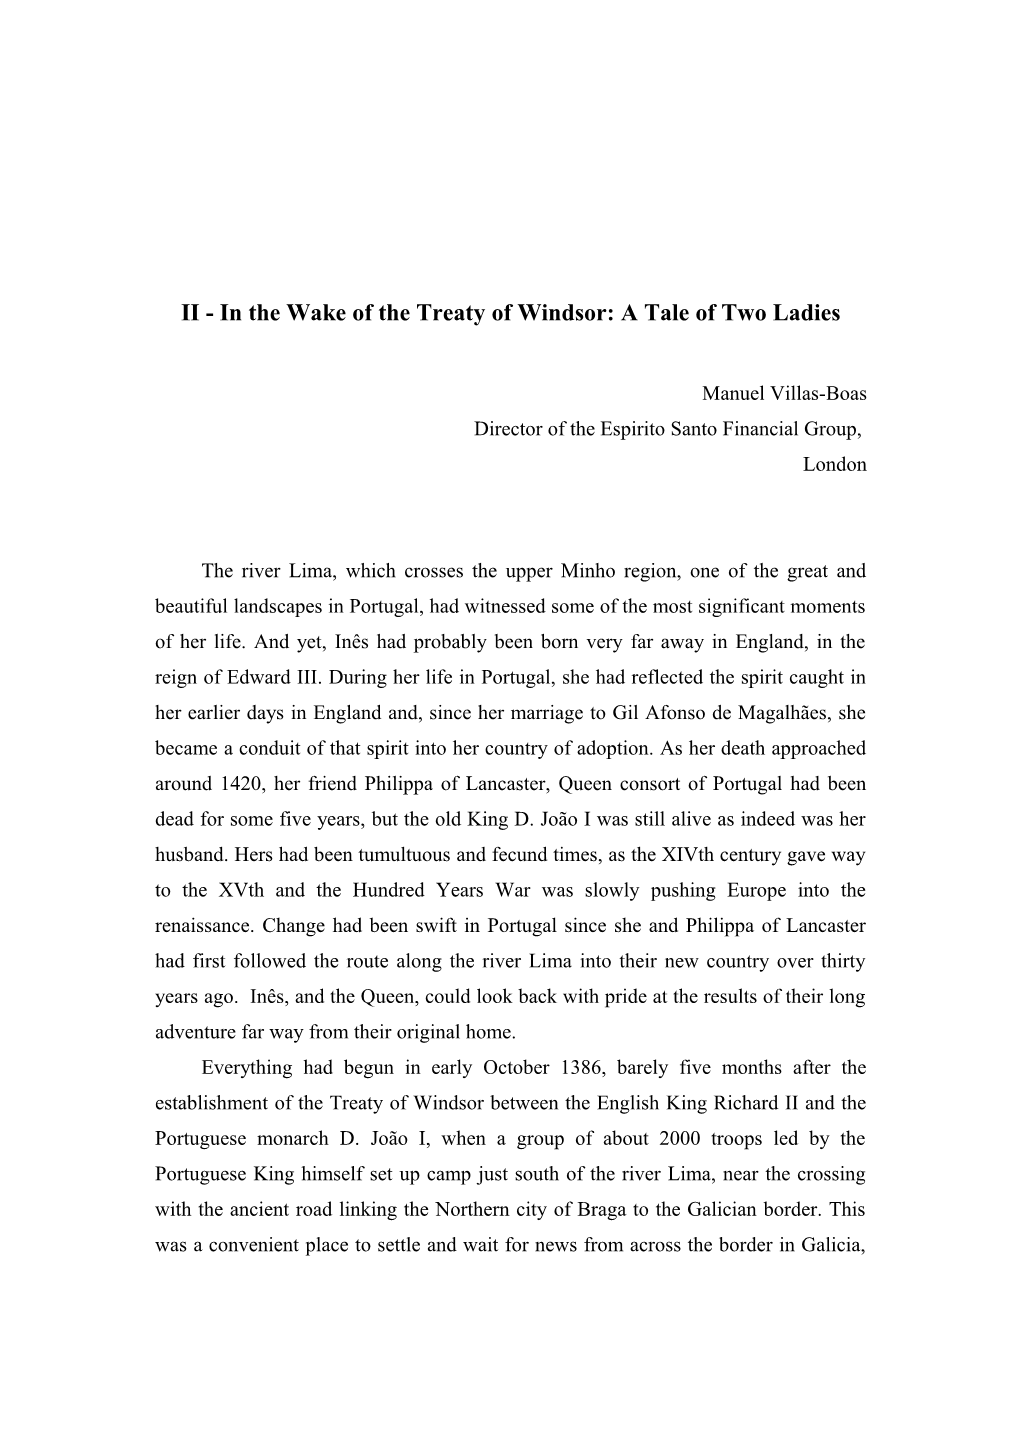 In the Wake the Treaty of Windsor: a Tale of Two Ladies